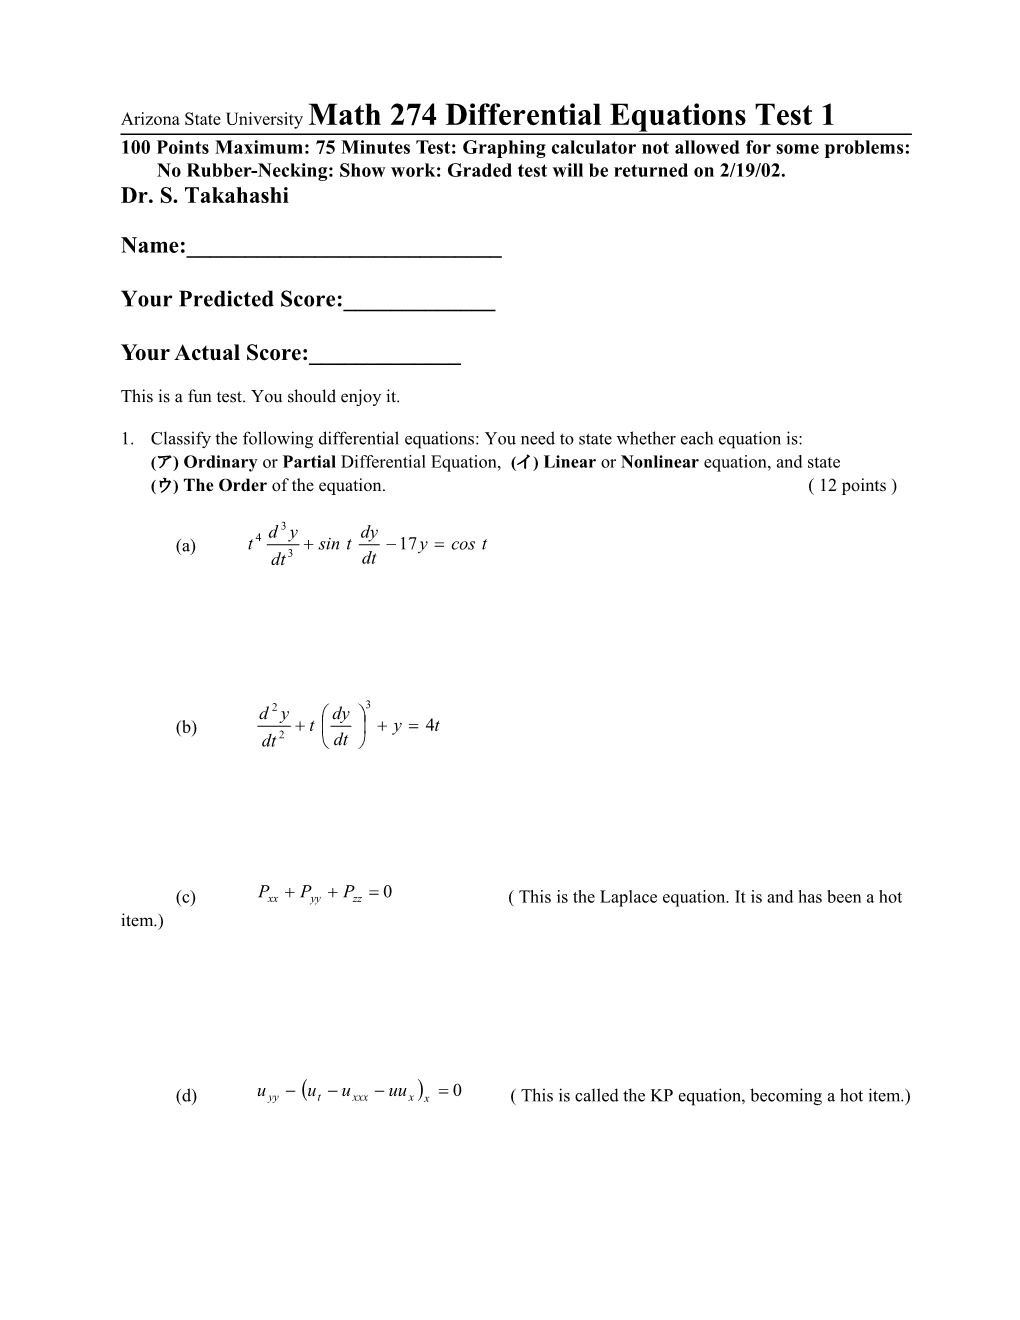 Arizona State University Math 274 Differential Equations Test 1